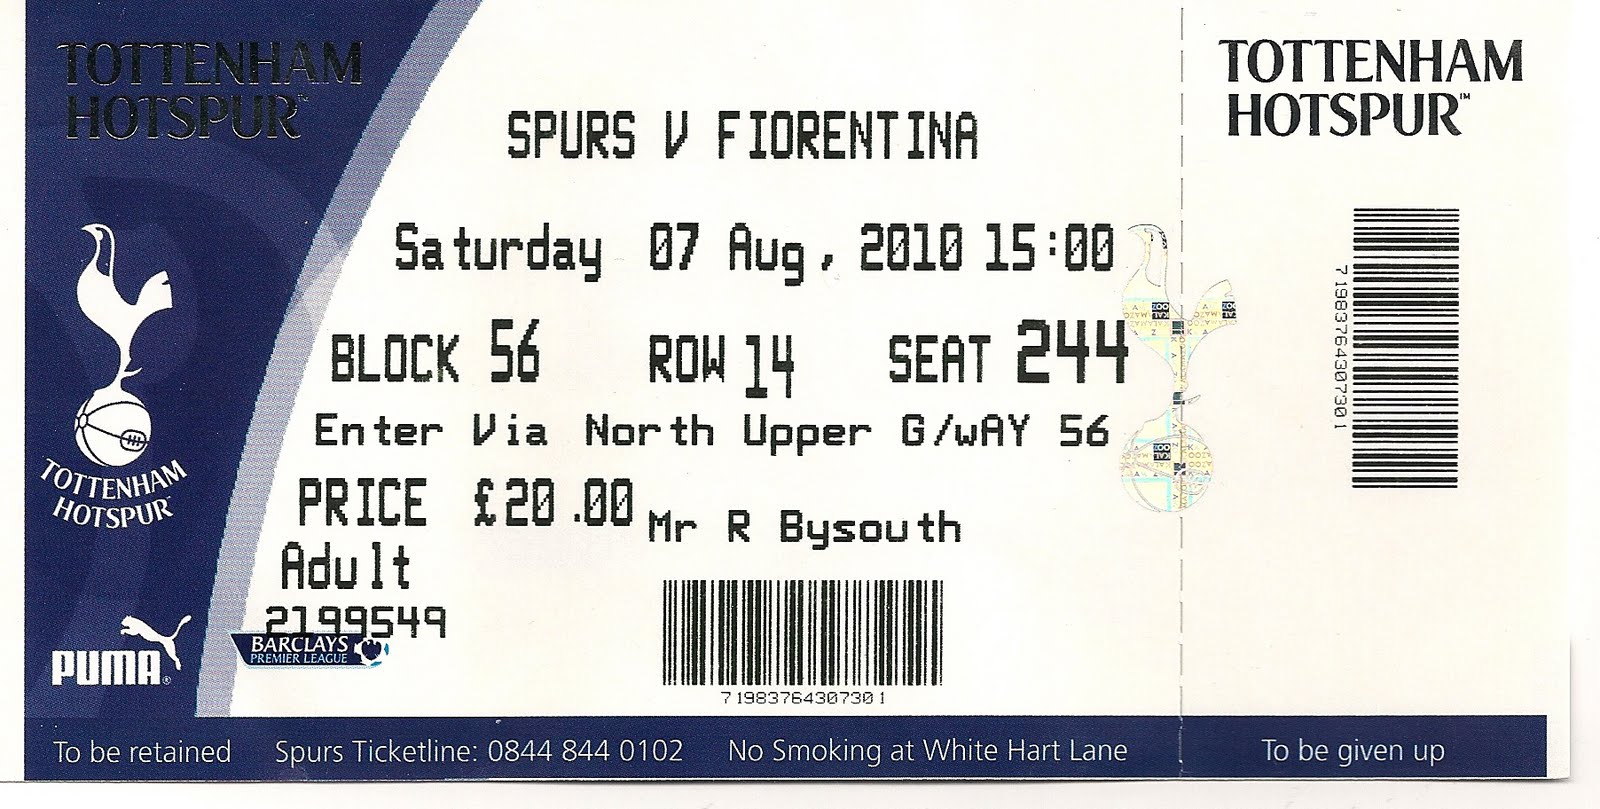 Football Grounds visited by Richard Bysouth: Tottenham Hotspur FC